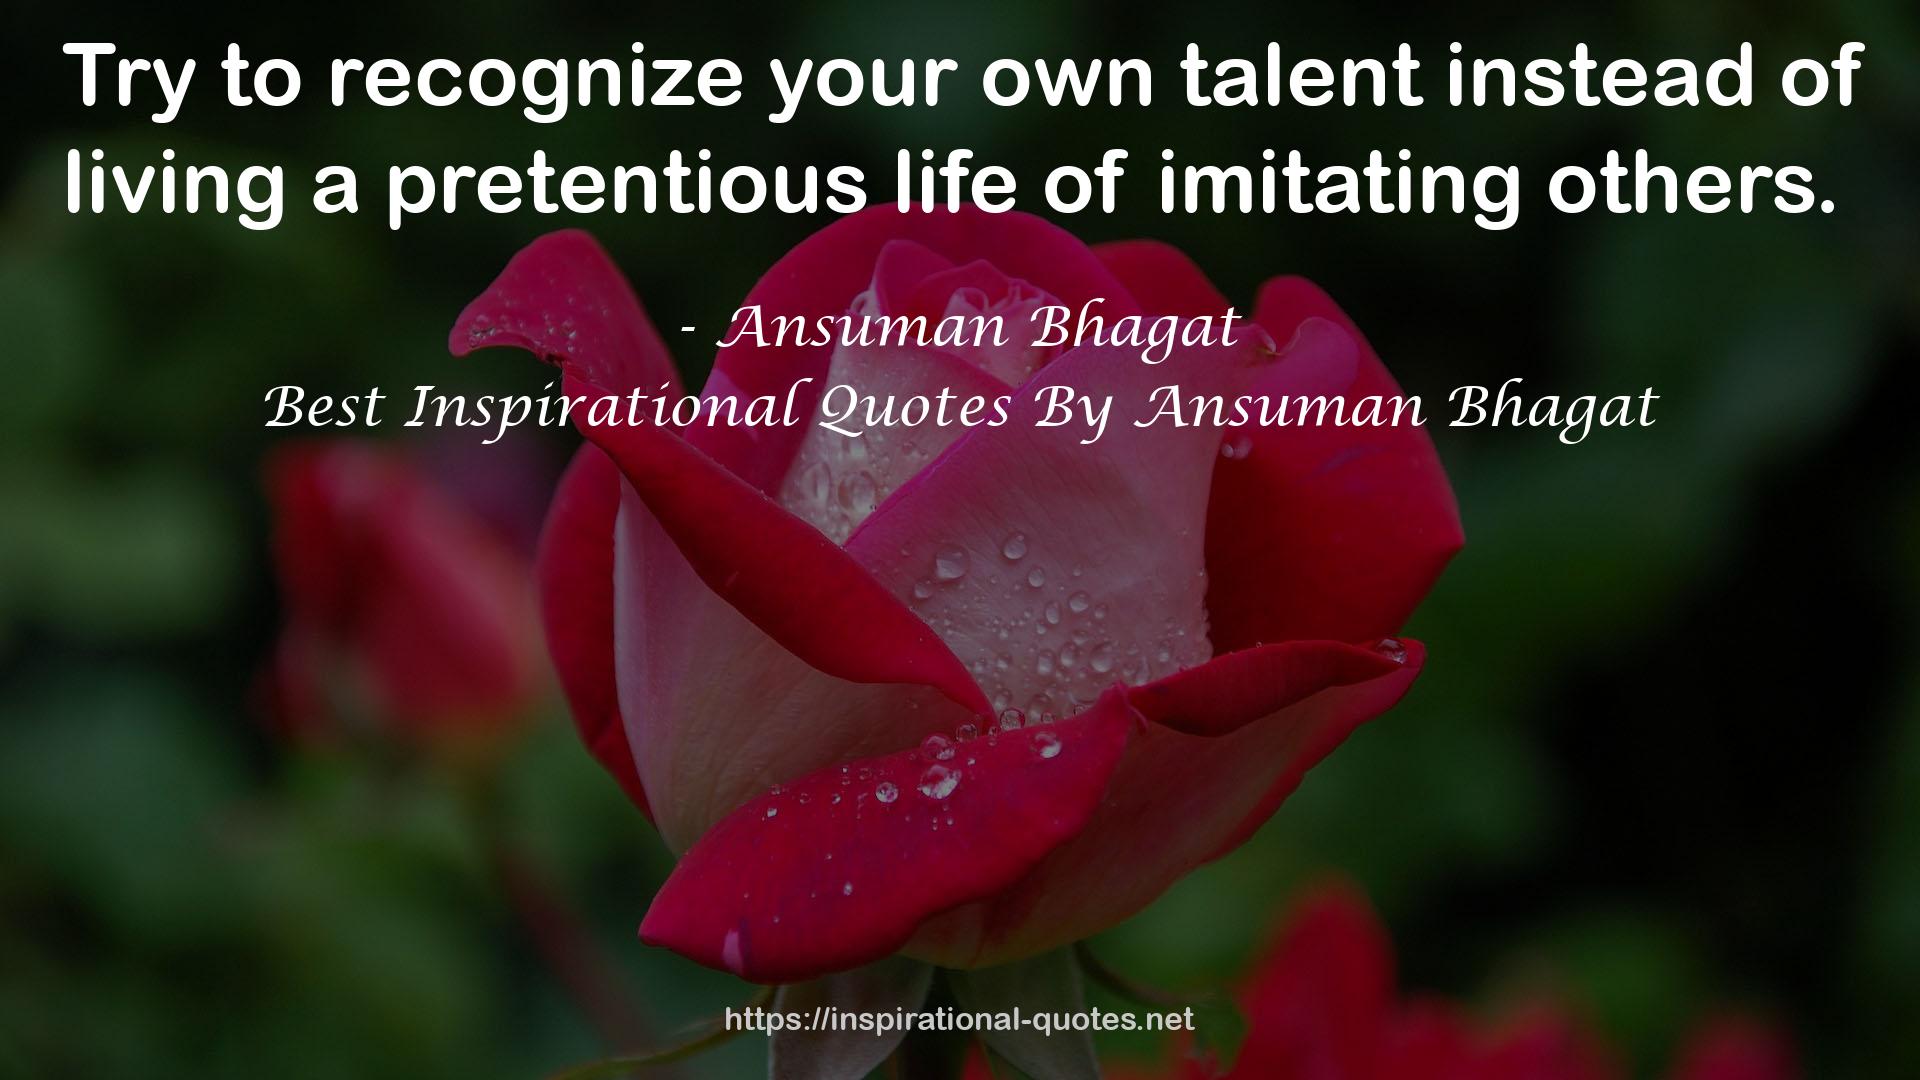 Best Inspirational Quotes By Ansuman Bhagat QUOTES